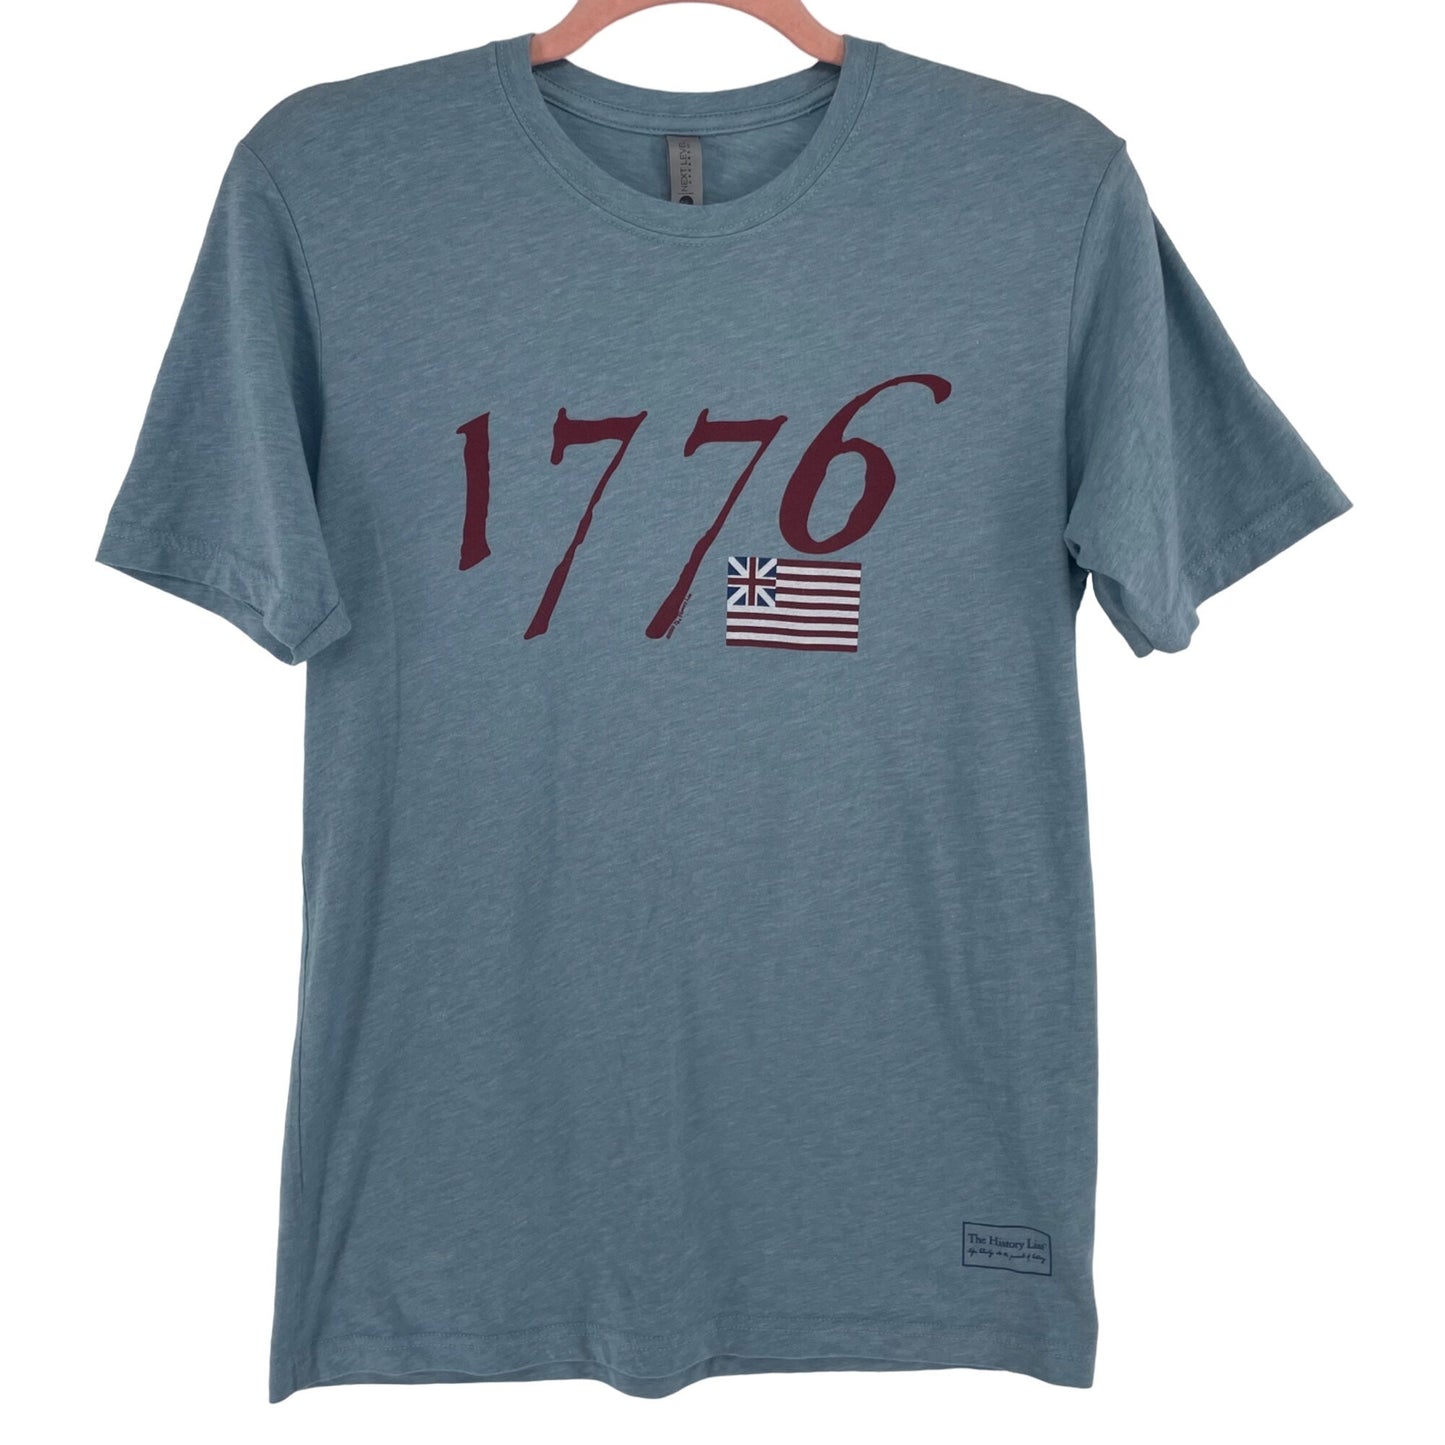 Next Level Apparel Women's Size Small Blue/Red/White 1776 Graphic T-Shirt